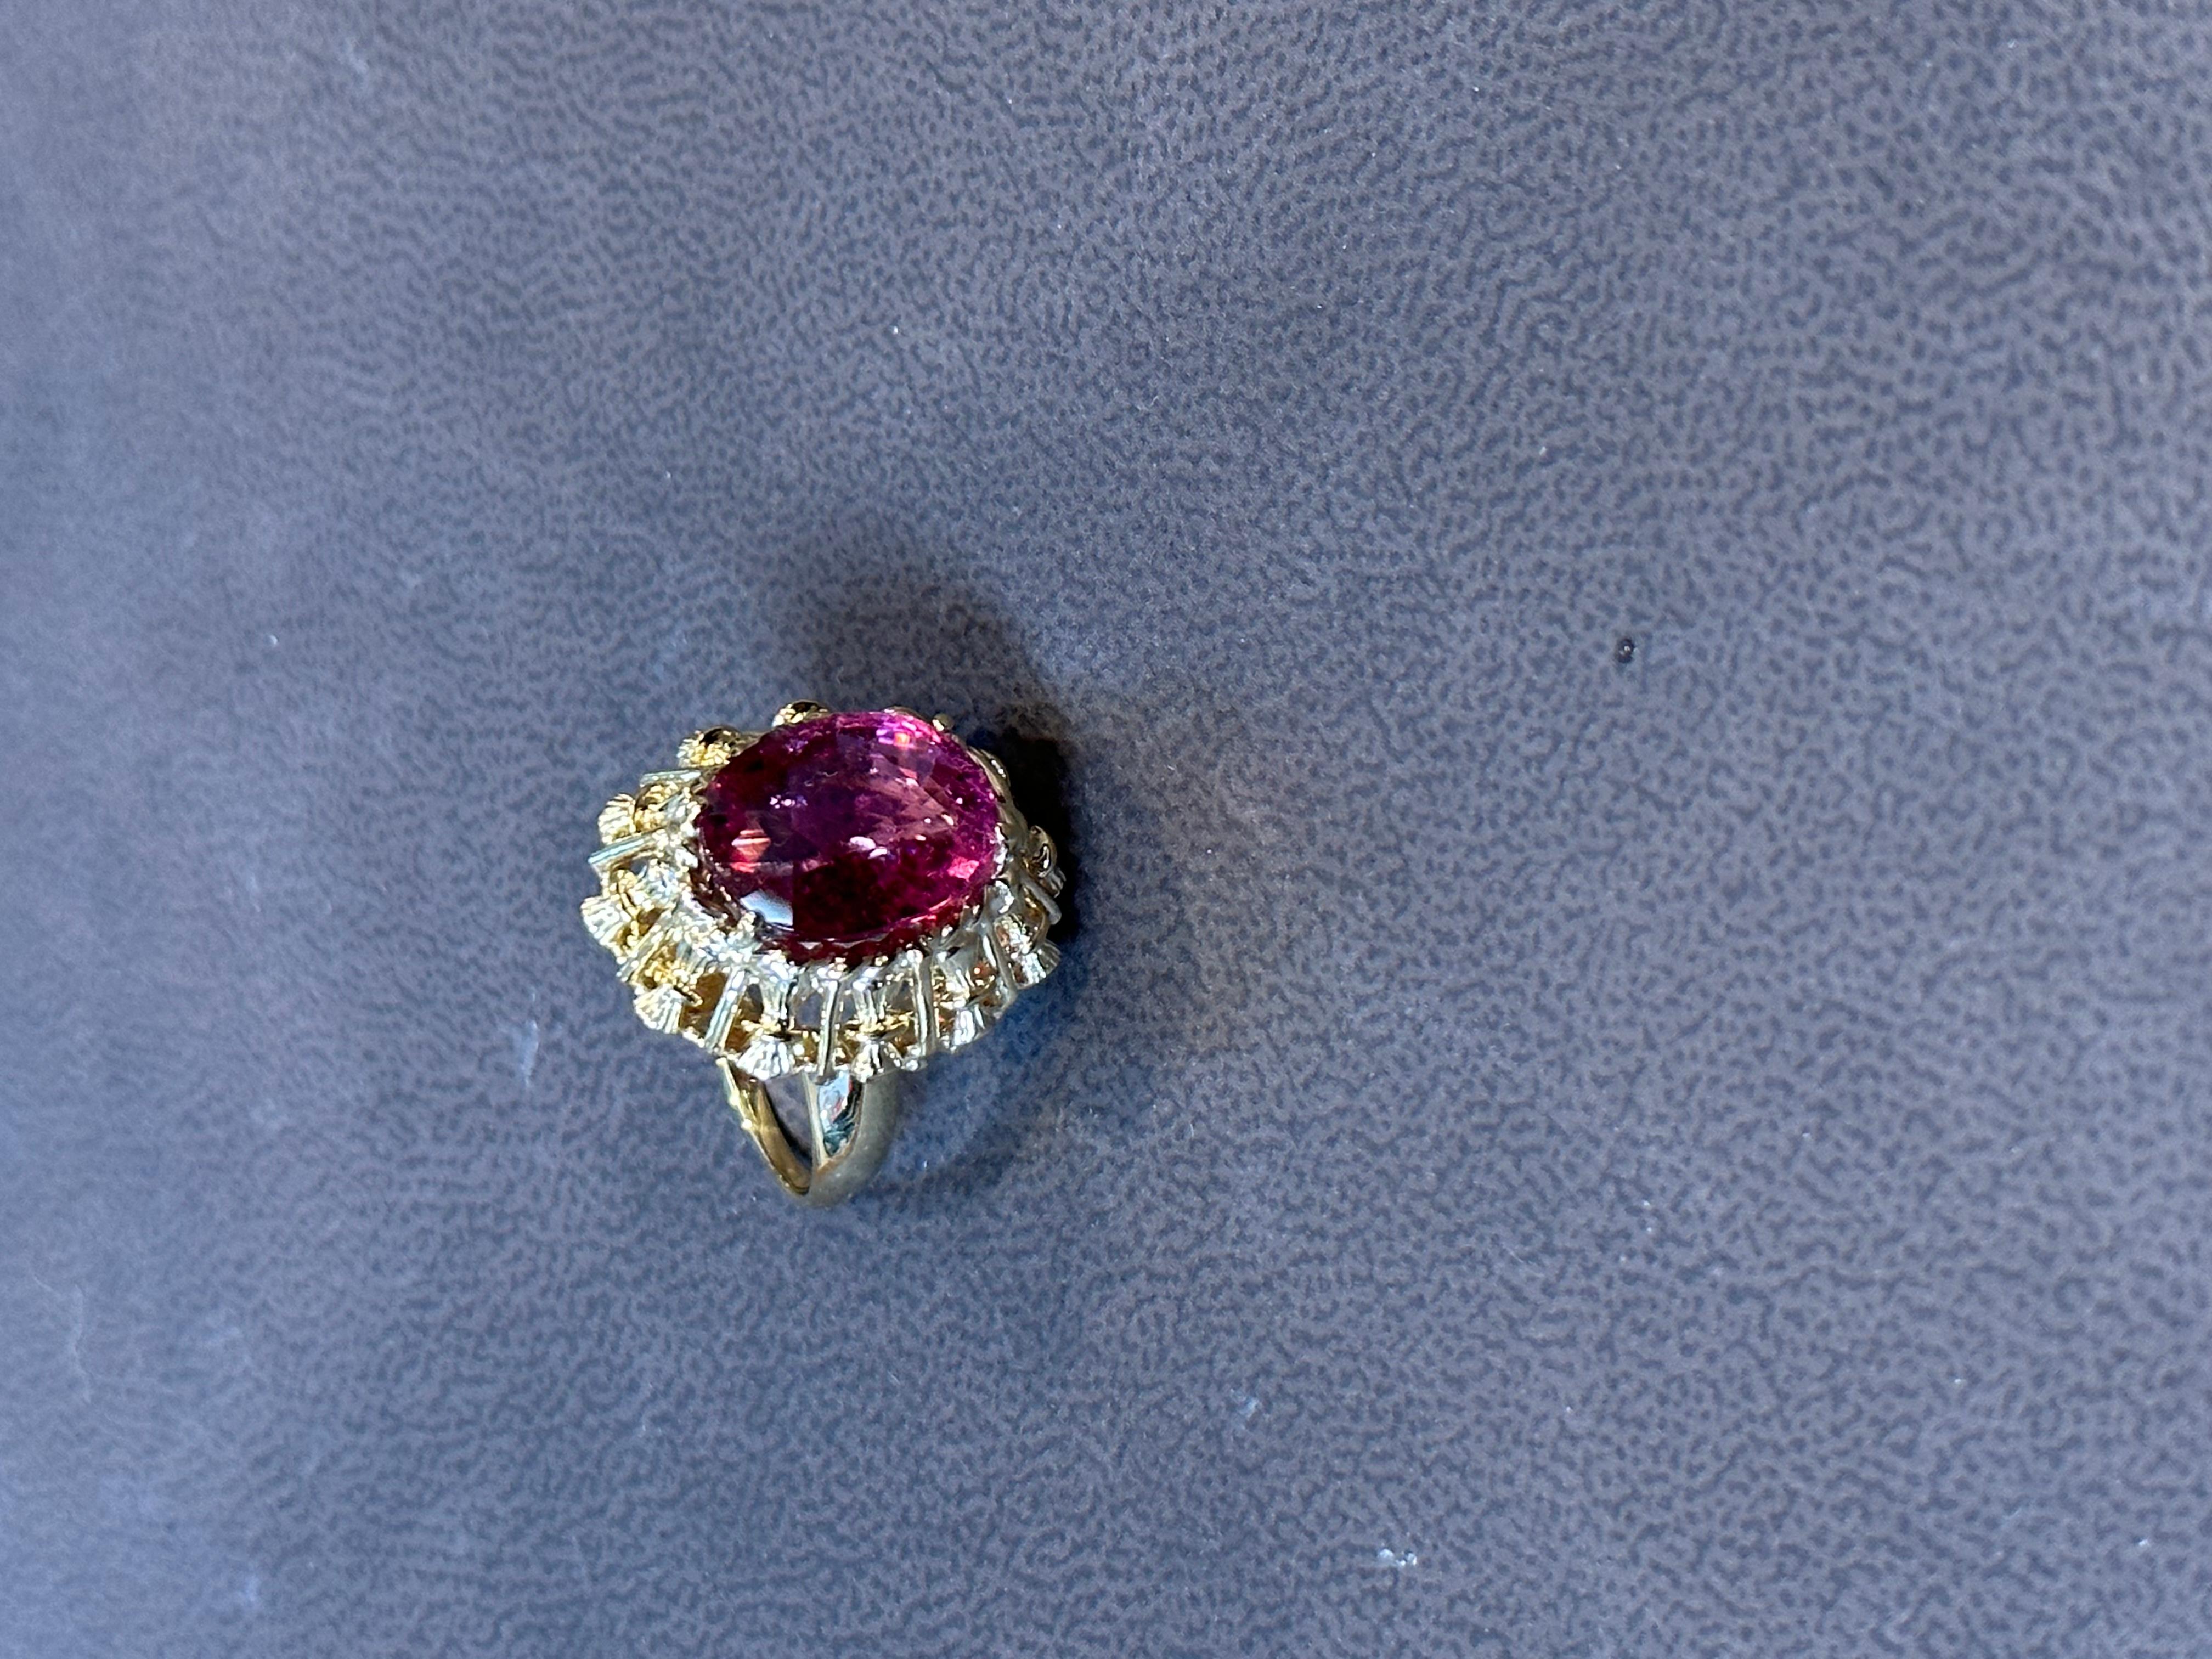 6 Carat Oval Cut Natural Pink Tourmaline 14 Karat Yellow Gold Ring In Excellent Condition For Sale In New York, NY